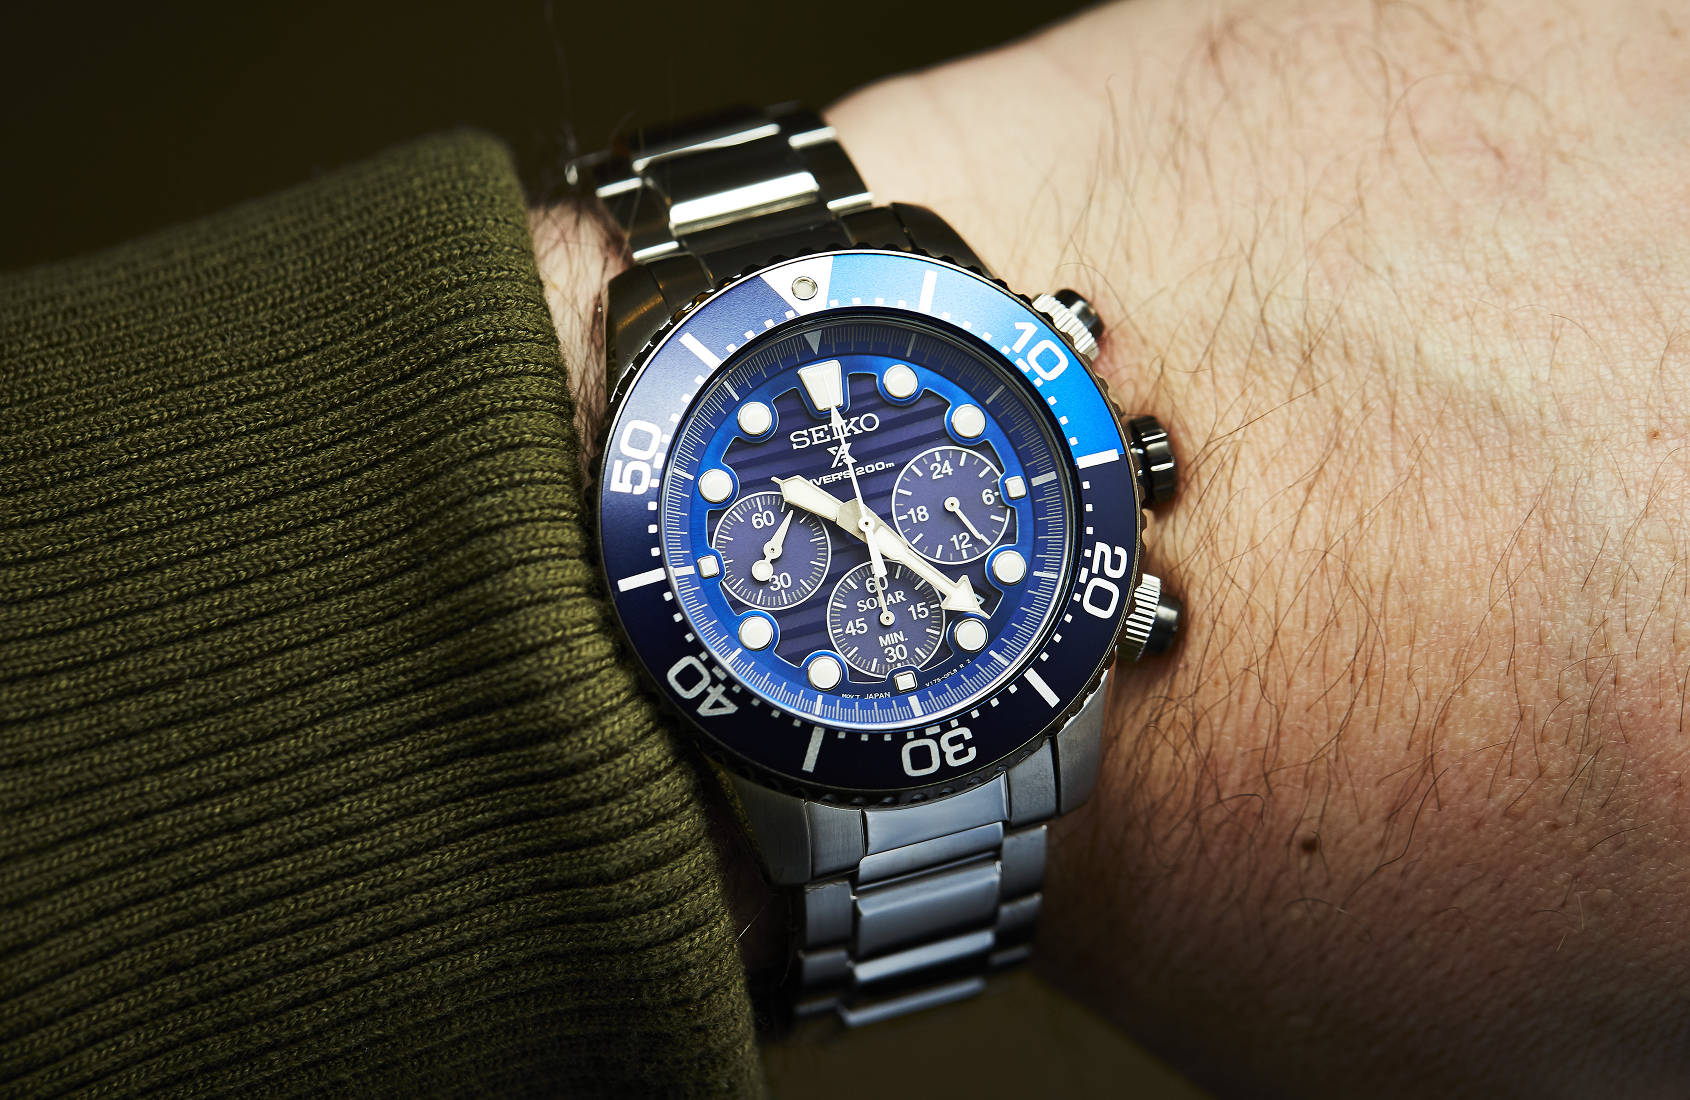 HANDS-ON: Sun and sea combined – the Seiko Prospex 'Save The Ocean' SSC675P